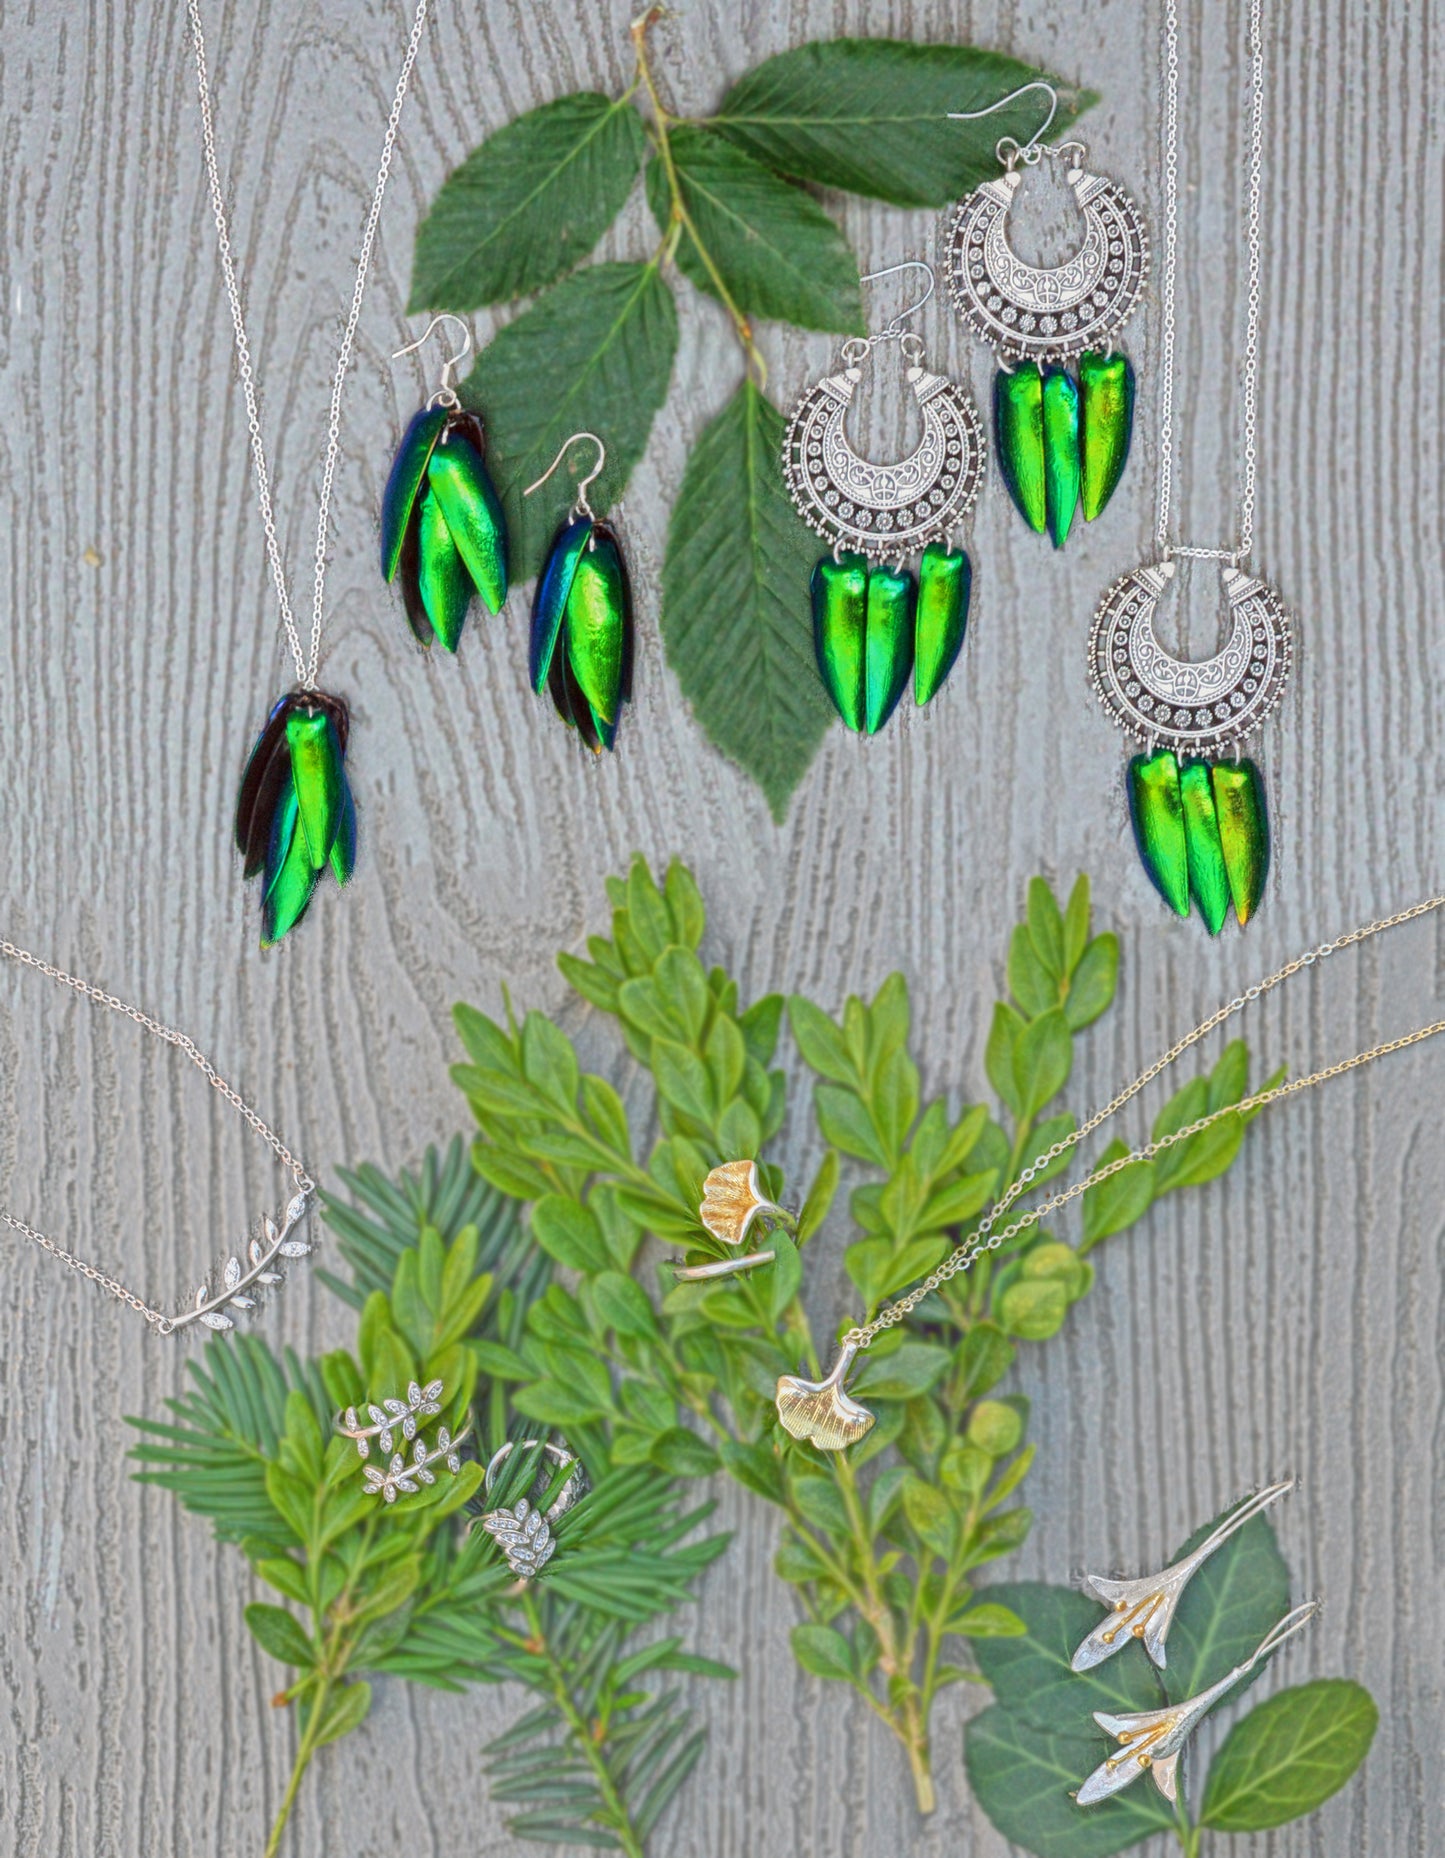 Jewel Wing Necklace